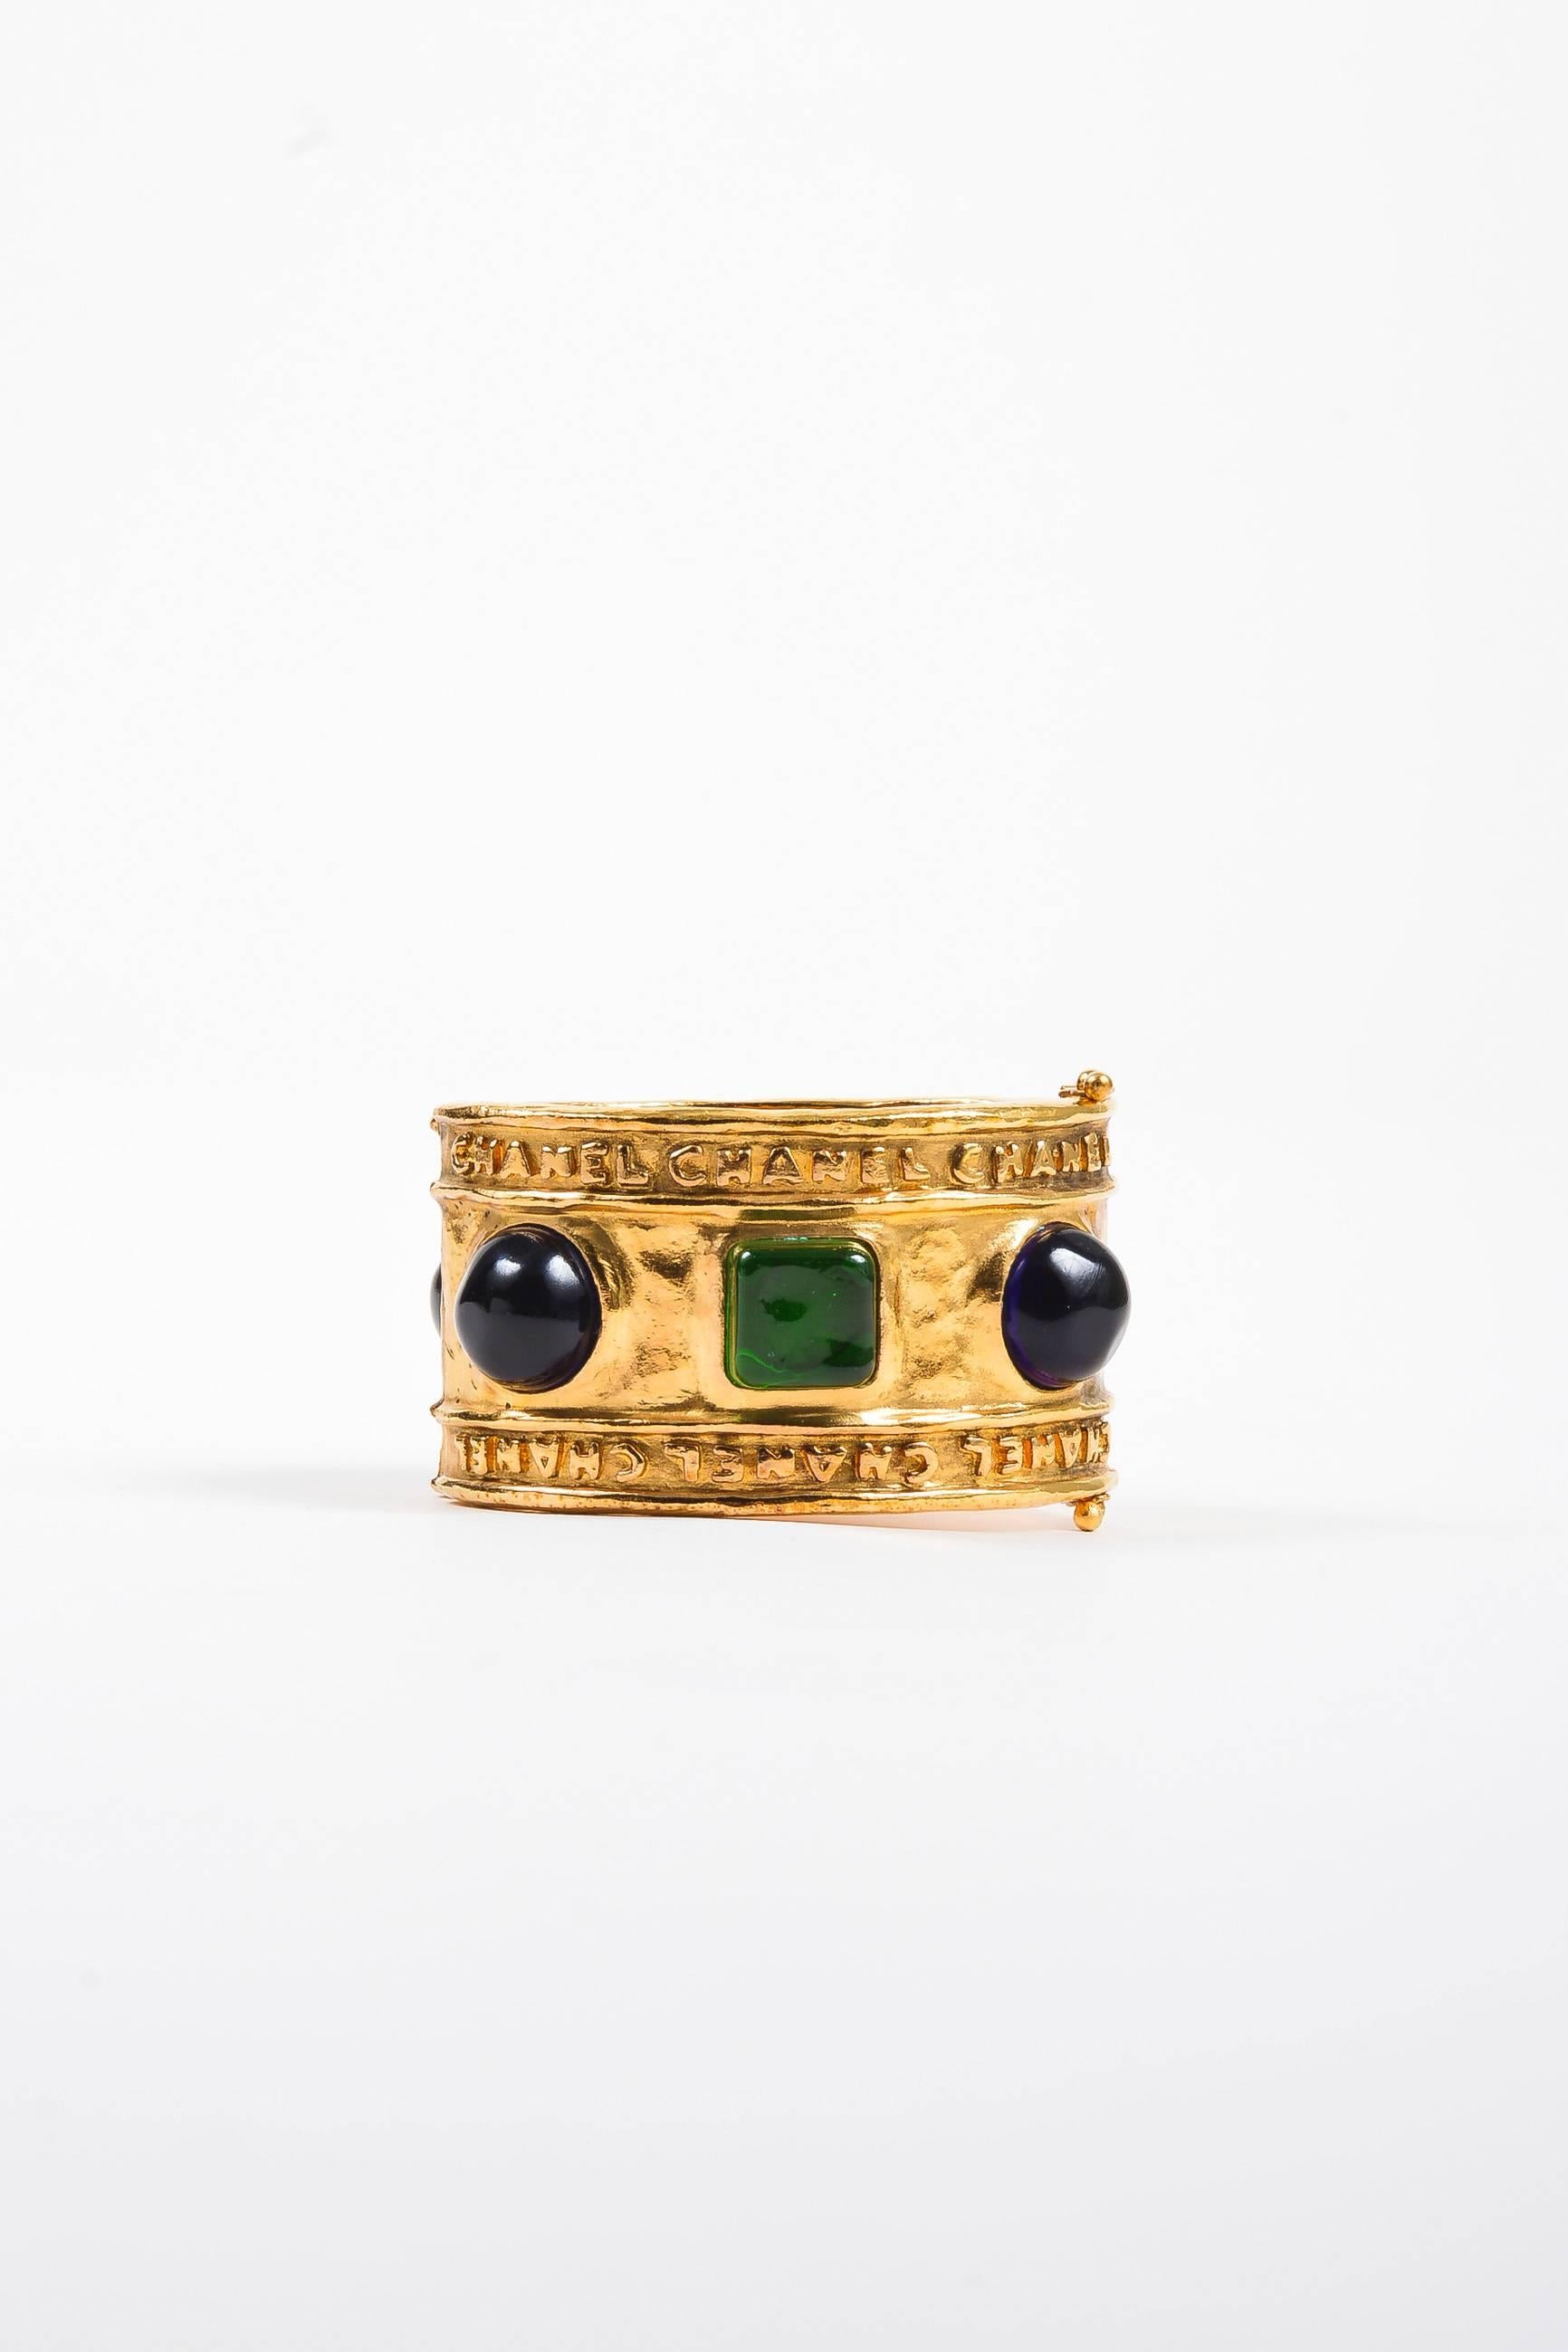 Vintage Chanel Gold Tone Hammered Blue Green Stone Embellished Cuff Bracelet In Good Condition For Sale In Chicago, IL